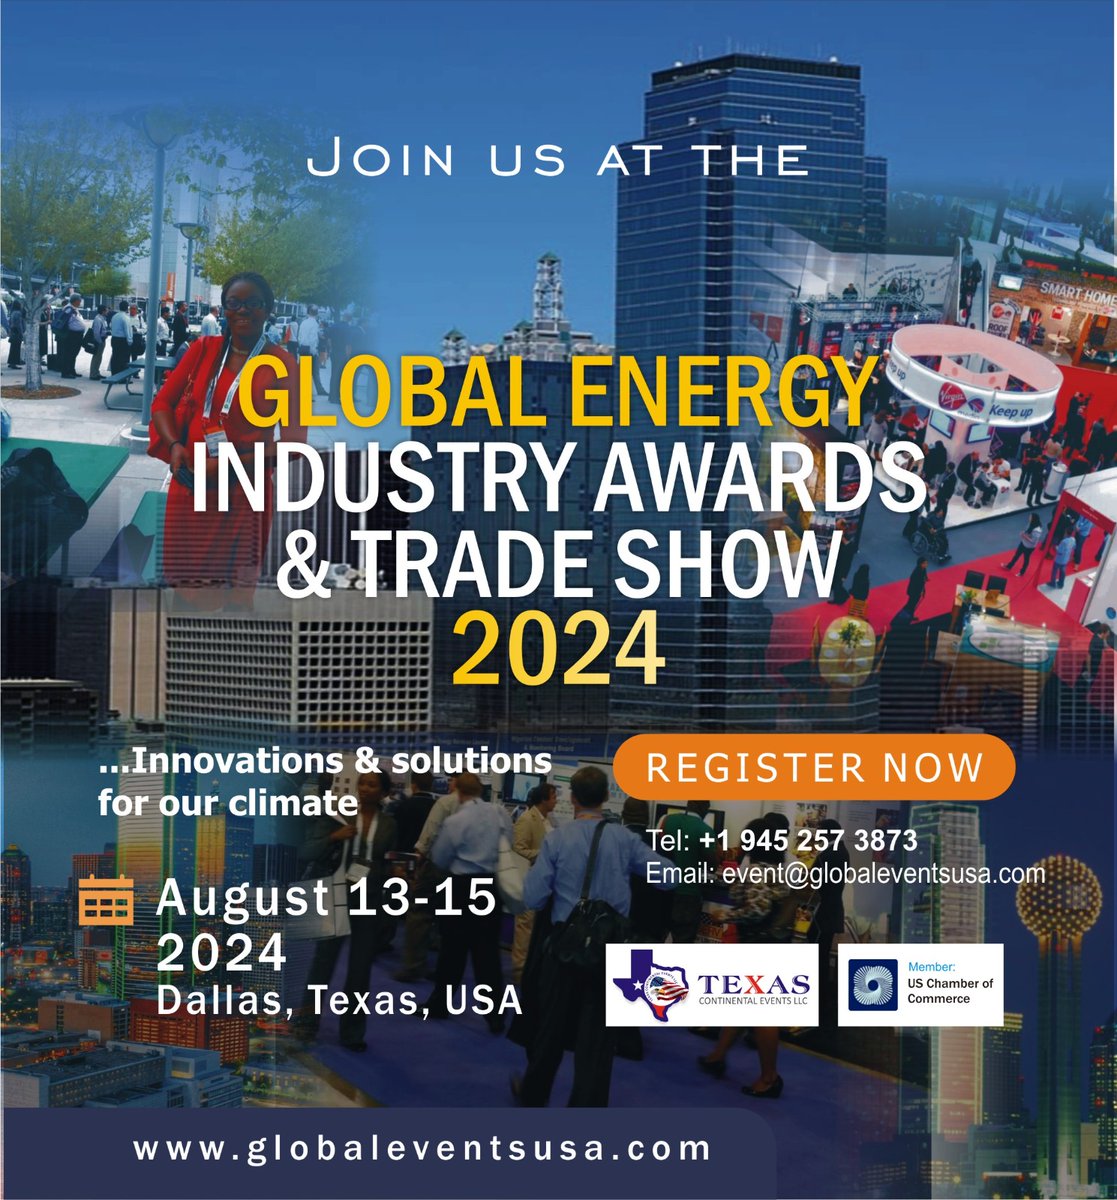 Experience the Global Energy Industry Awards and Tradeshow from August 13-15, 2024, at the Hilton Dallas Lincoln Center in Dallas, Texas, USA. Take advantage of the unique networking opportunities. globaleventsusa.com